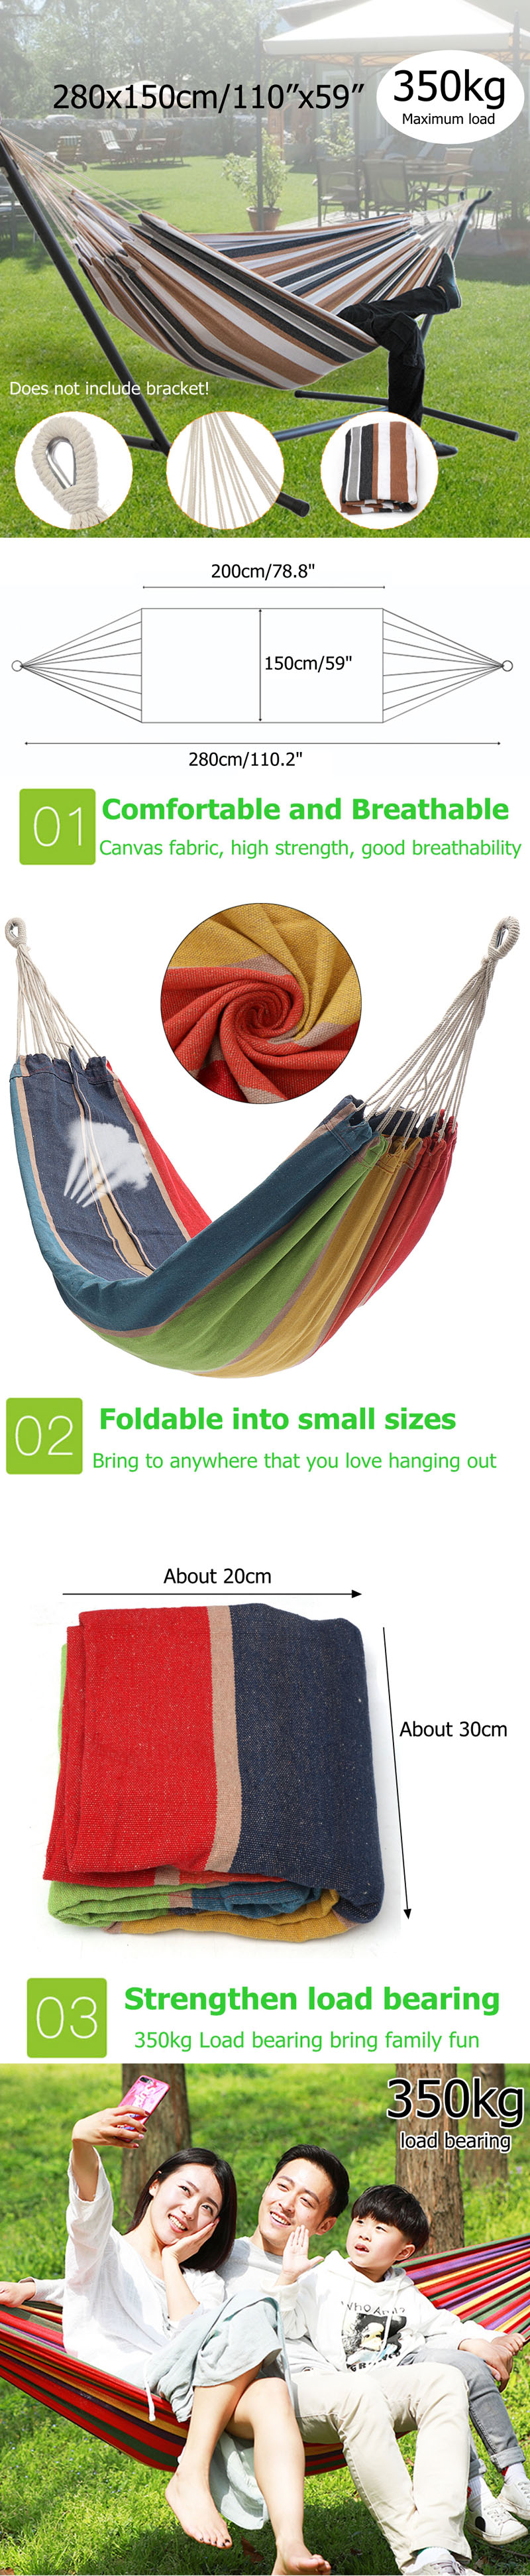 Parachute-Double-Hammock-Swing-Hanging-Camping-Travel-Portable-Swing-Bed-Max-Load-350kg-1420902-1